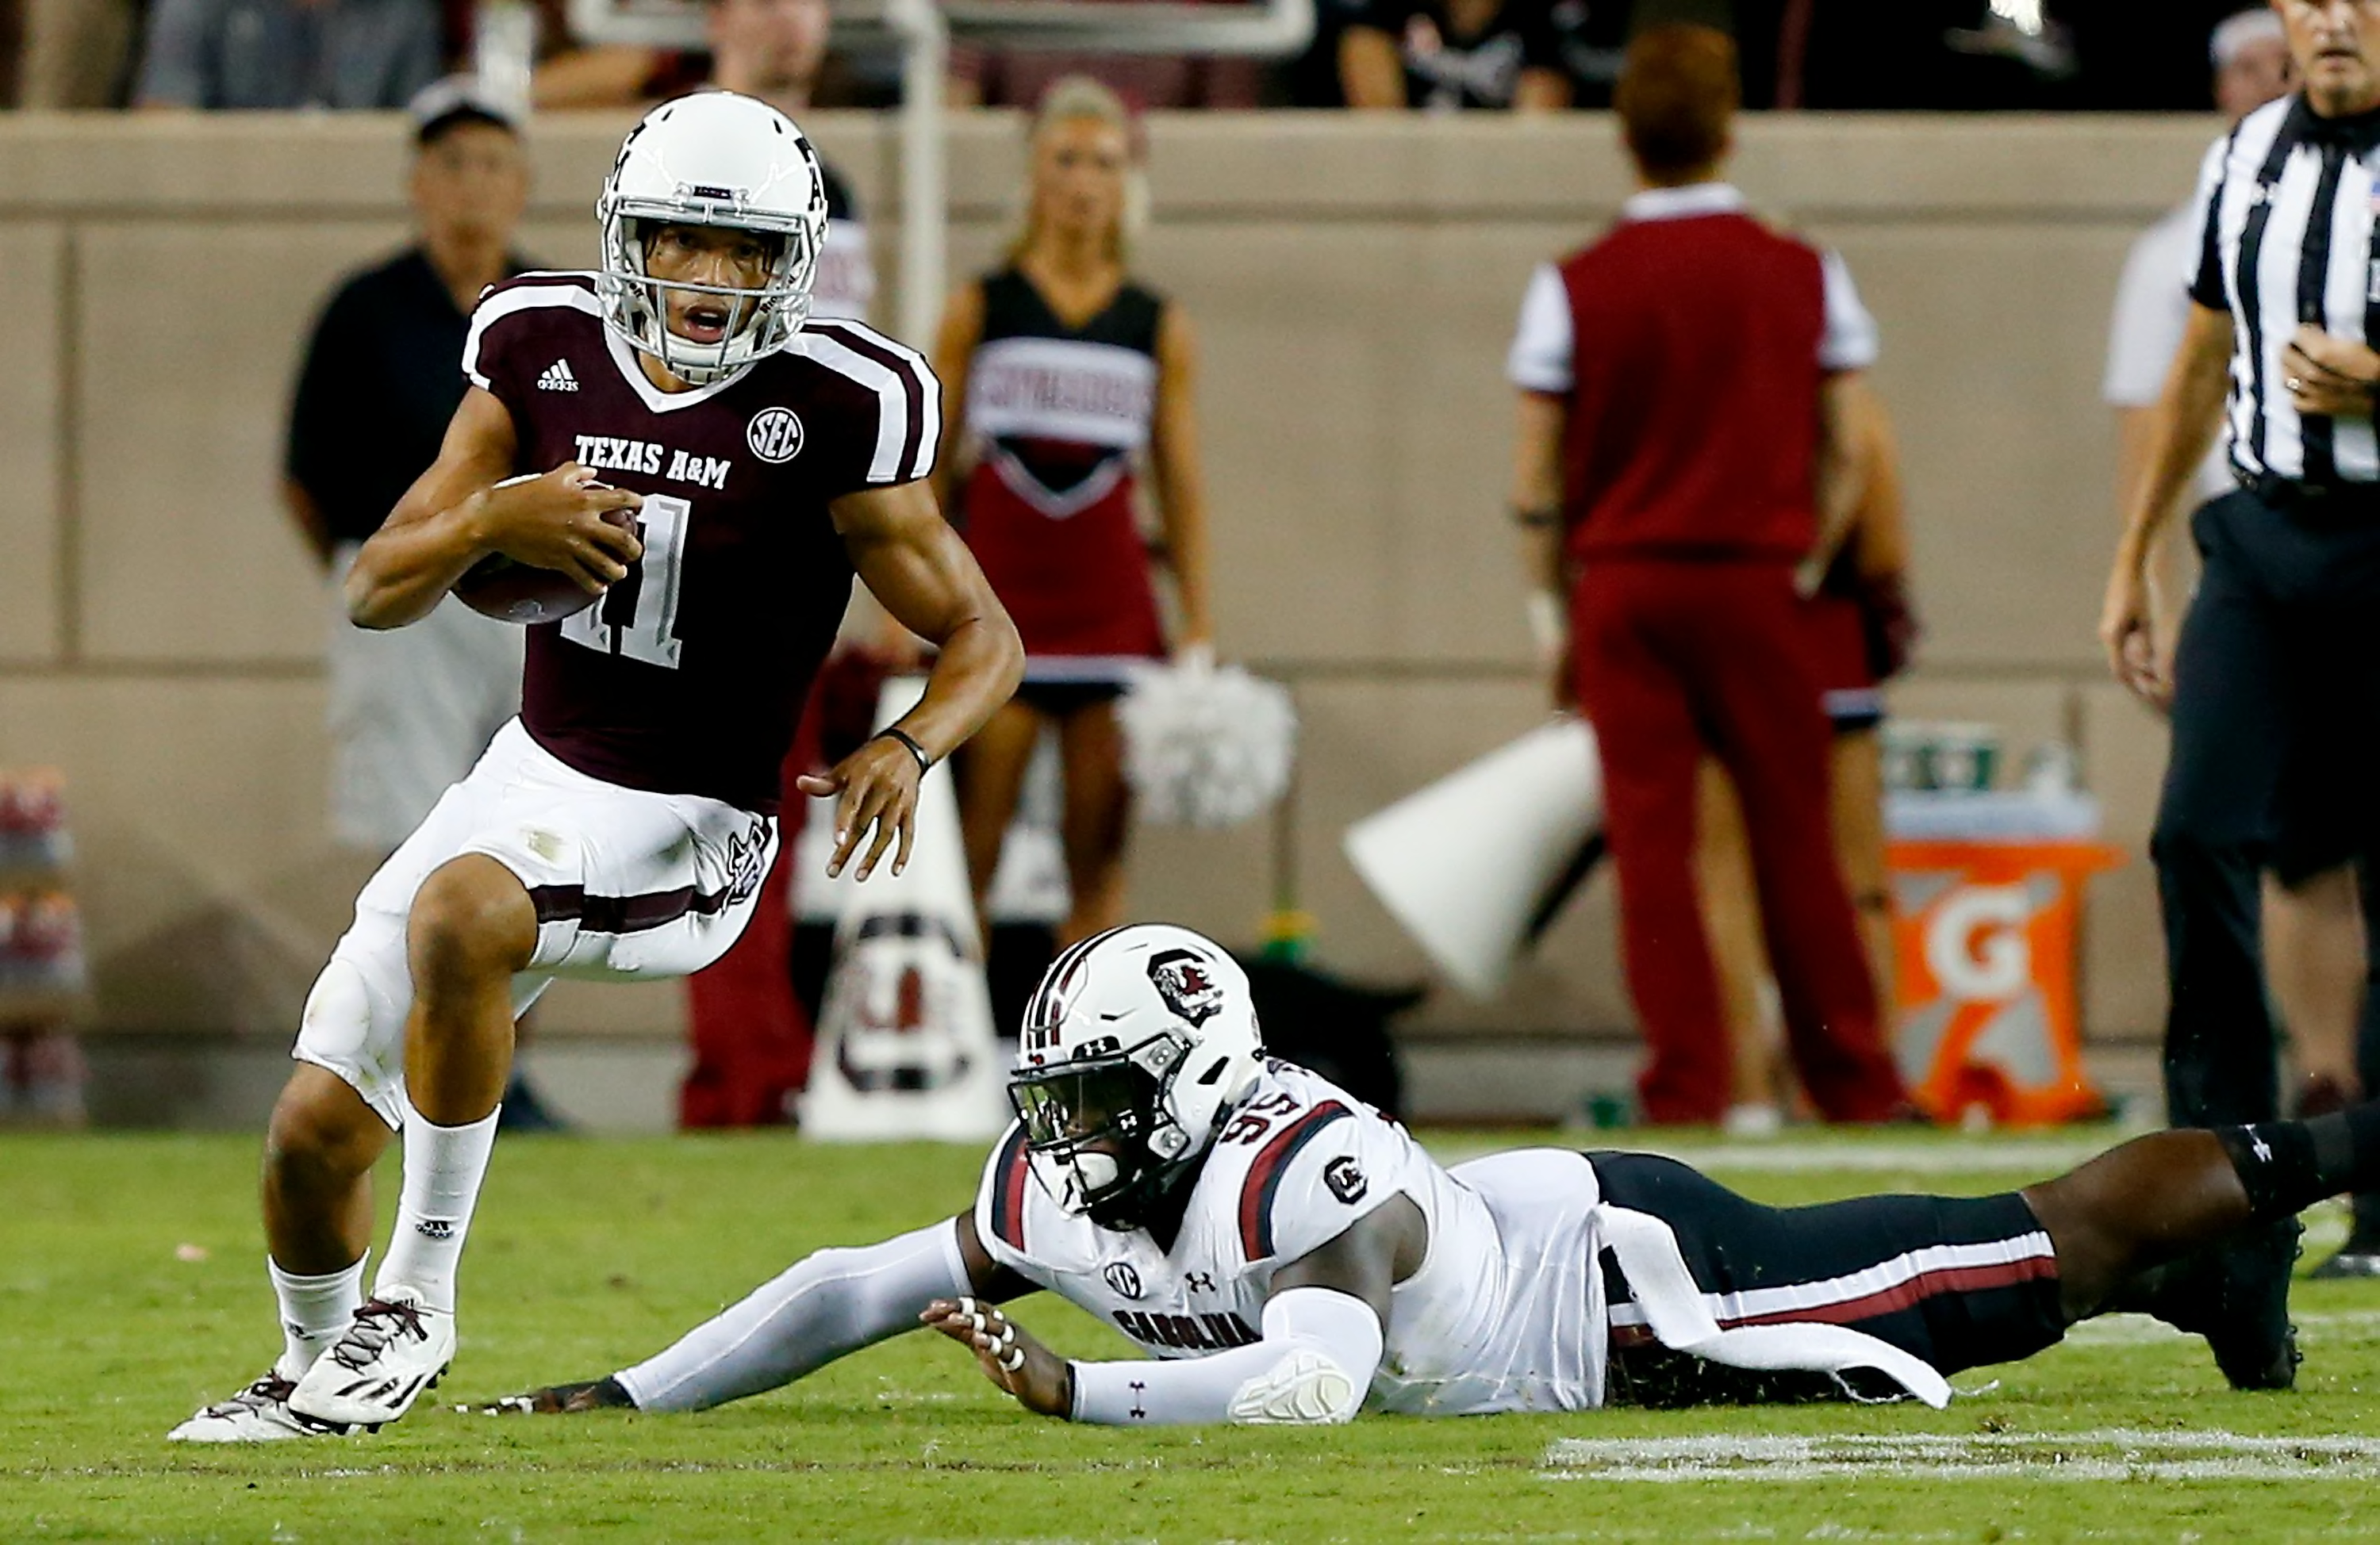 Texas A&M Football: 5 overreactions from win over South Carolina - Page 2